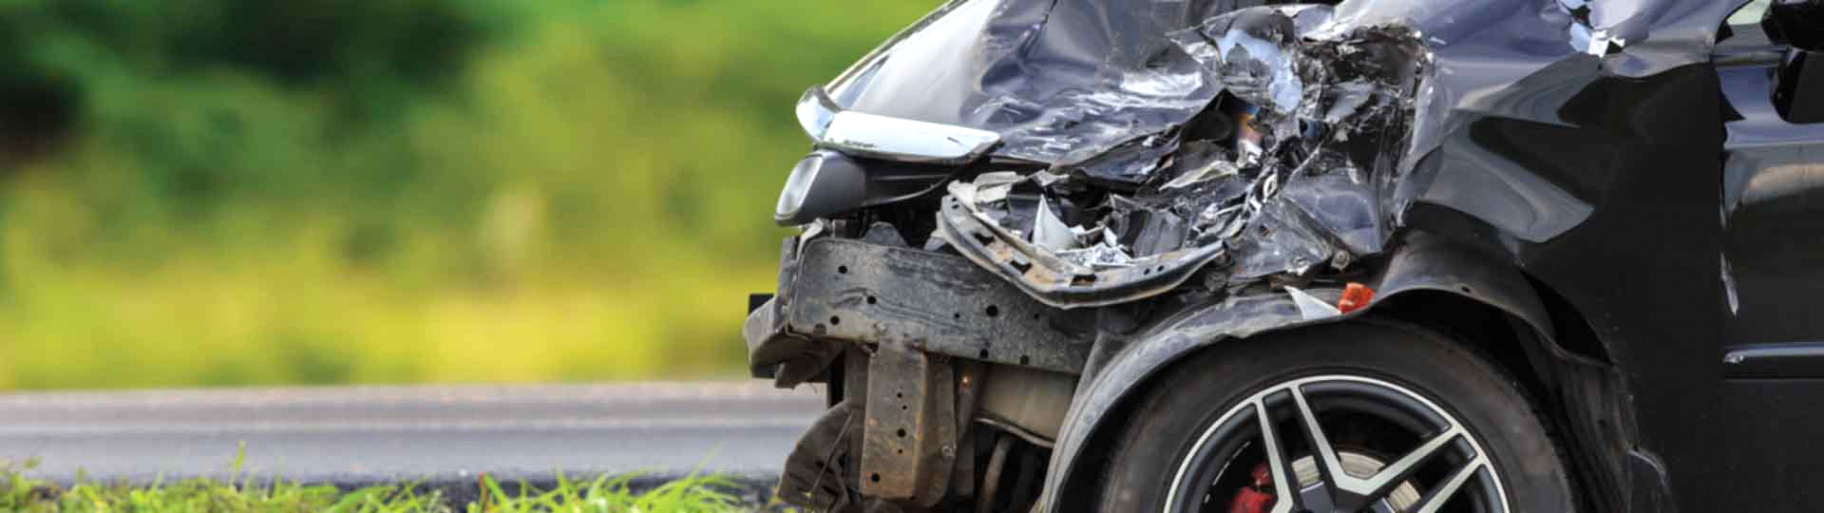 Lincoln Wy Car Accident Lawyer Dans Personal Injury attorneys - the Child & Jackson Law Firm